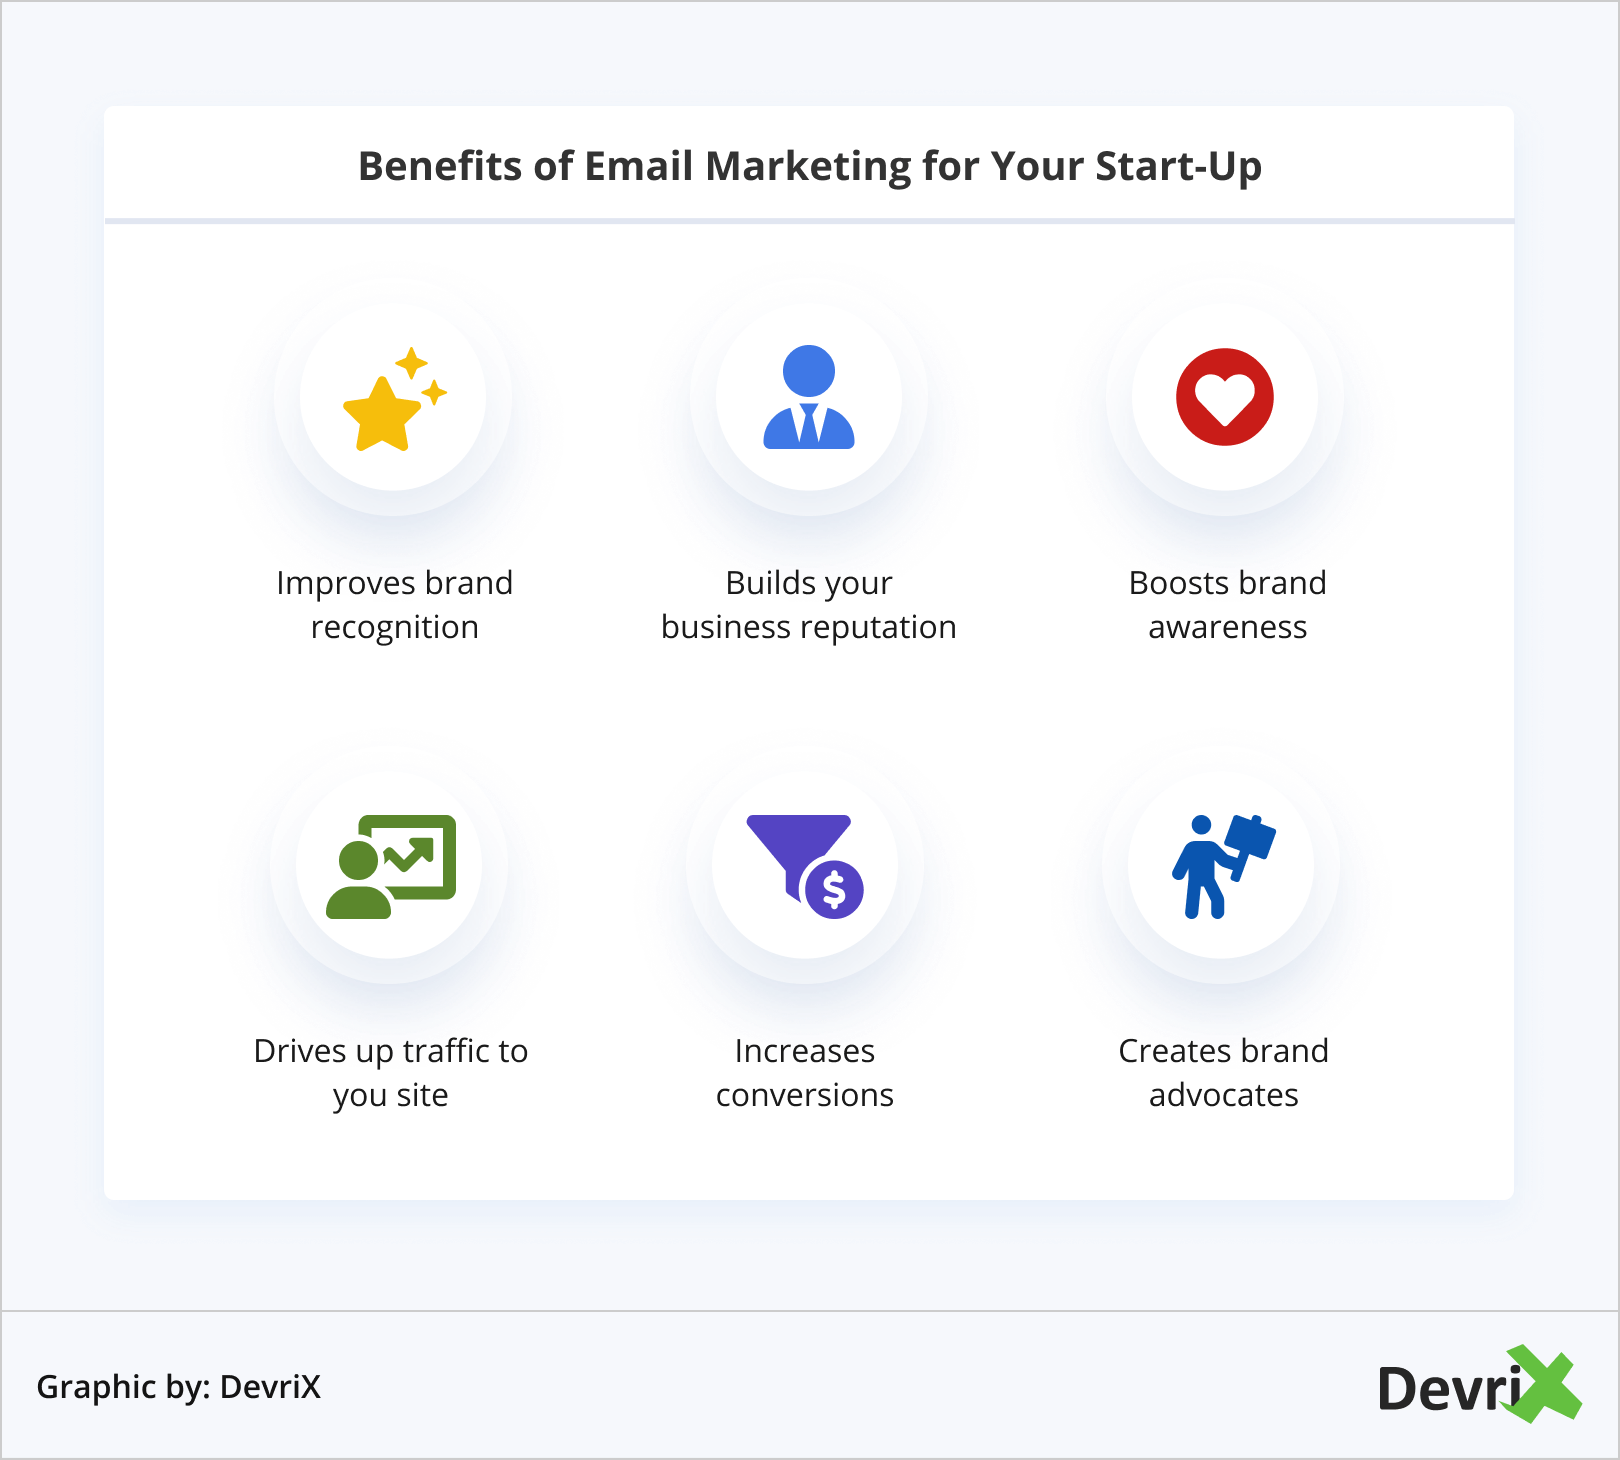 Benefits of Email Marketing for Your Start-Up